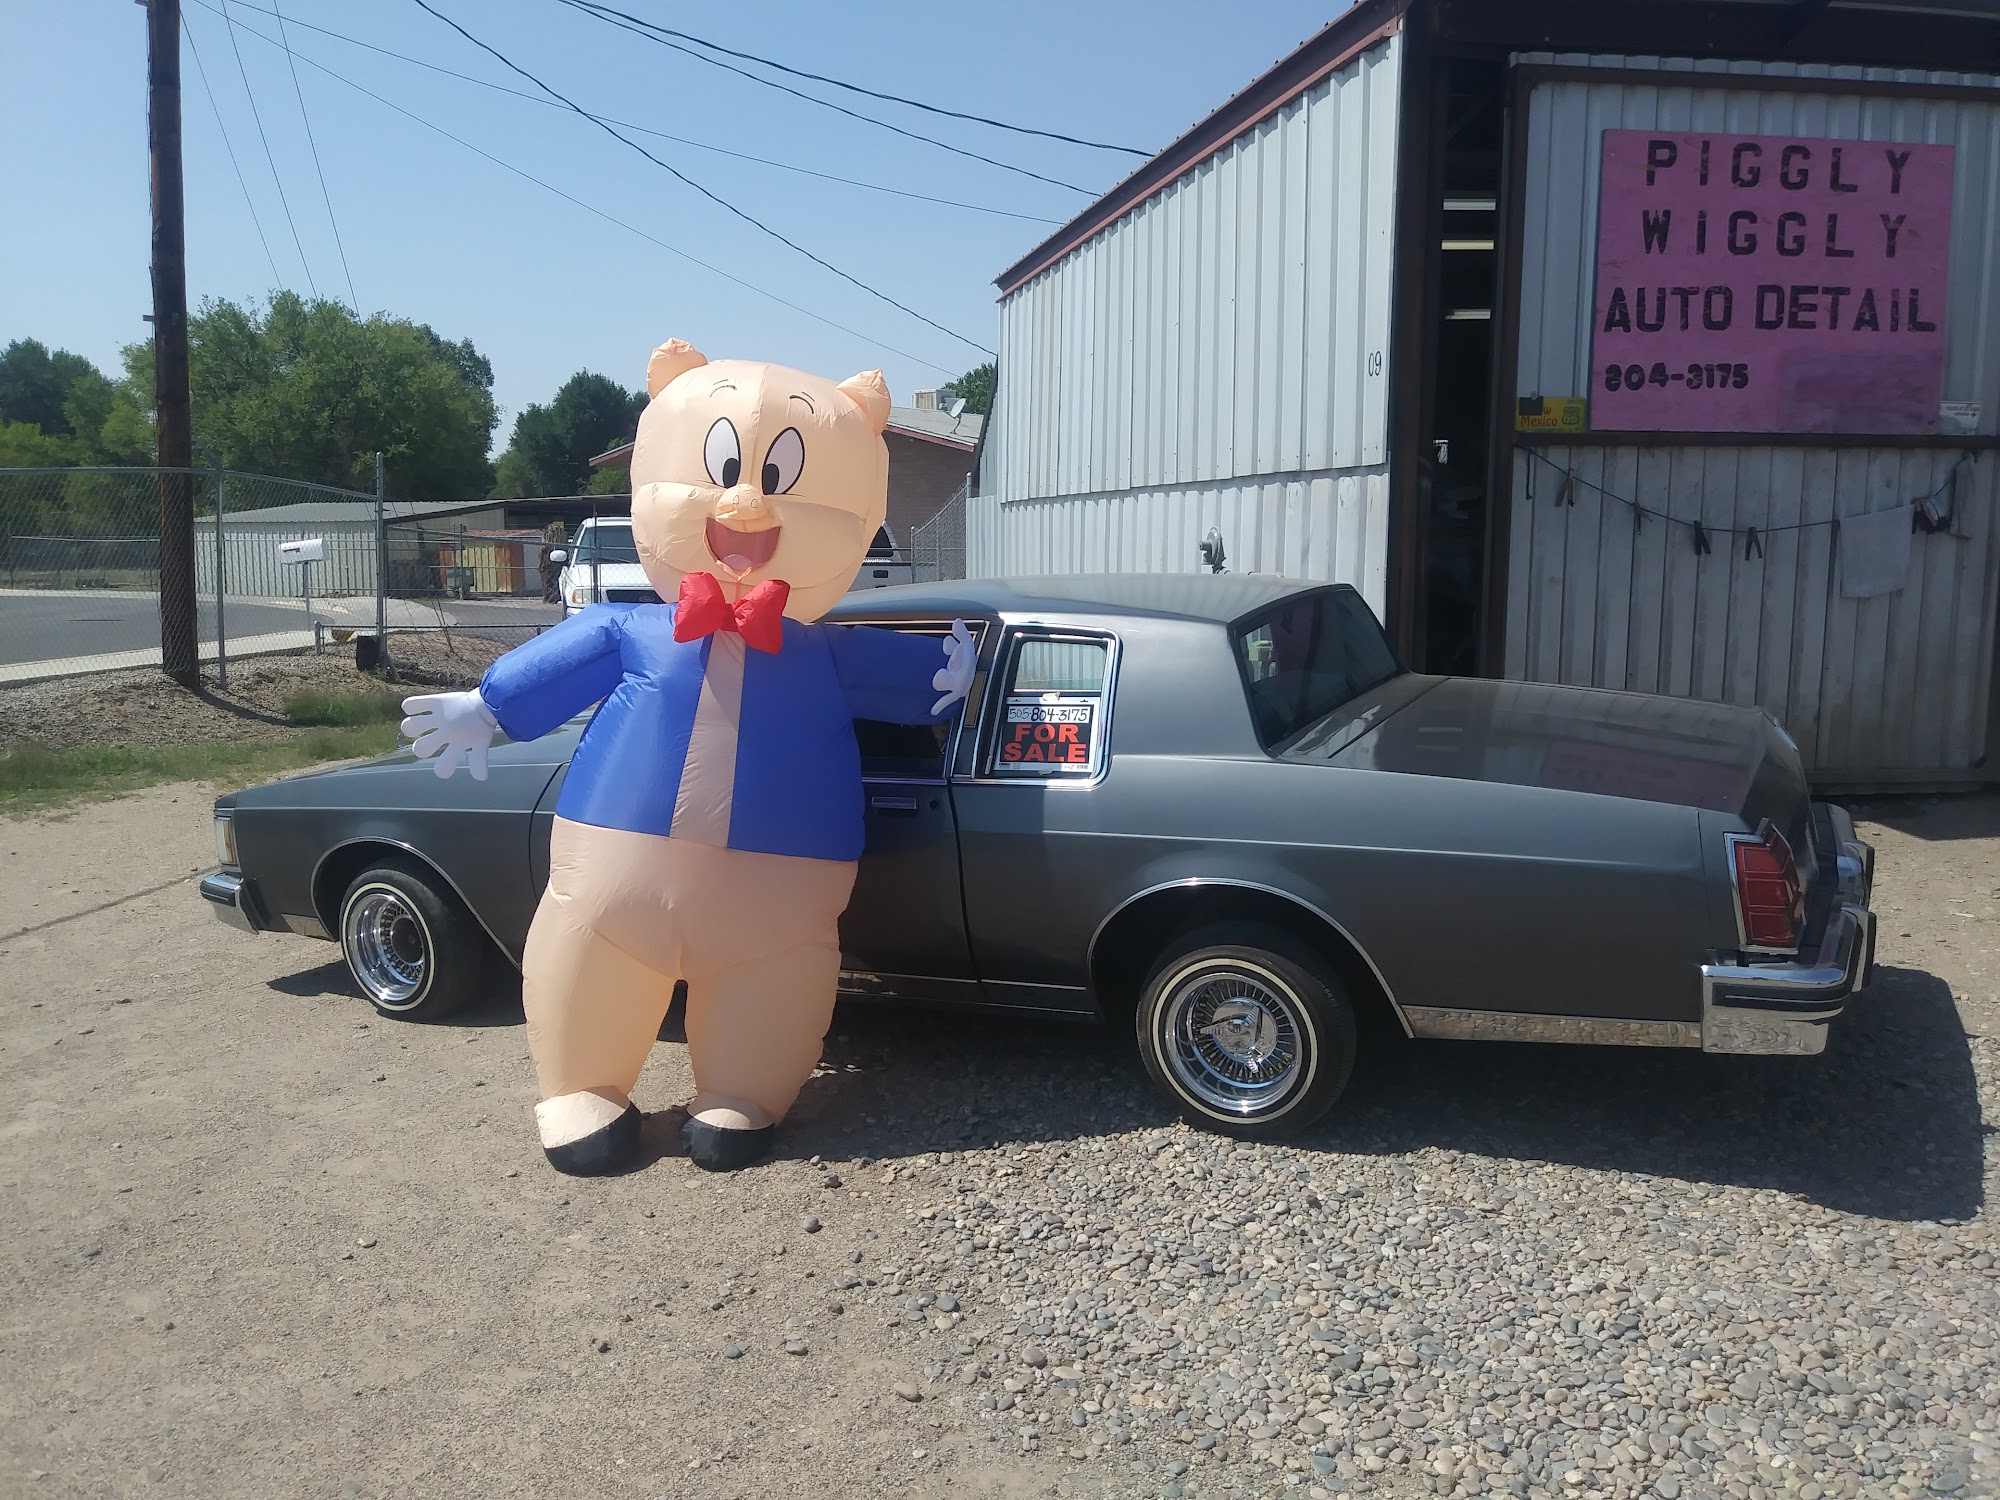 PIGGLY WIGGLY AUTO DETAIL